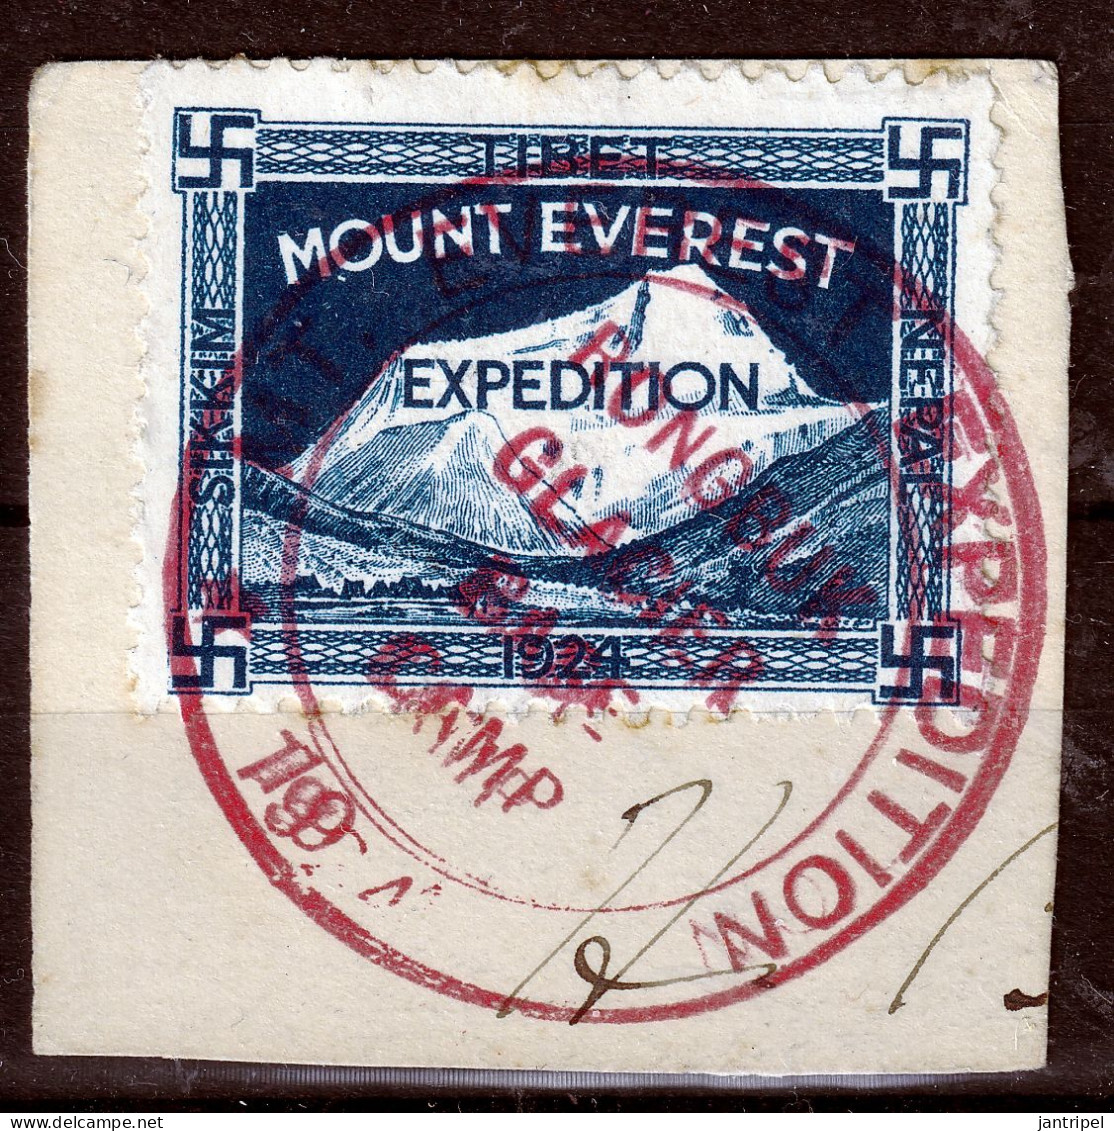 TIBET 1924 MOUNT EVEREST EXPEDITION RONGBUK GLACIER BASE CAMP CANCELLATION On COVER FRAGMENT - Autres - Asie